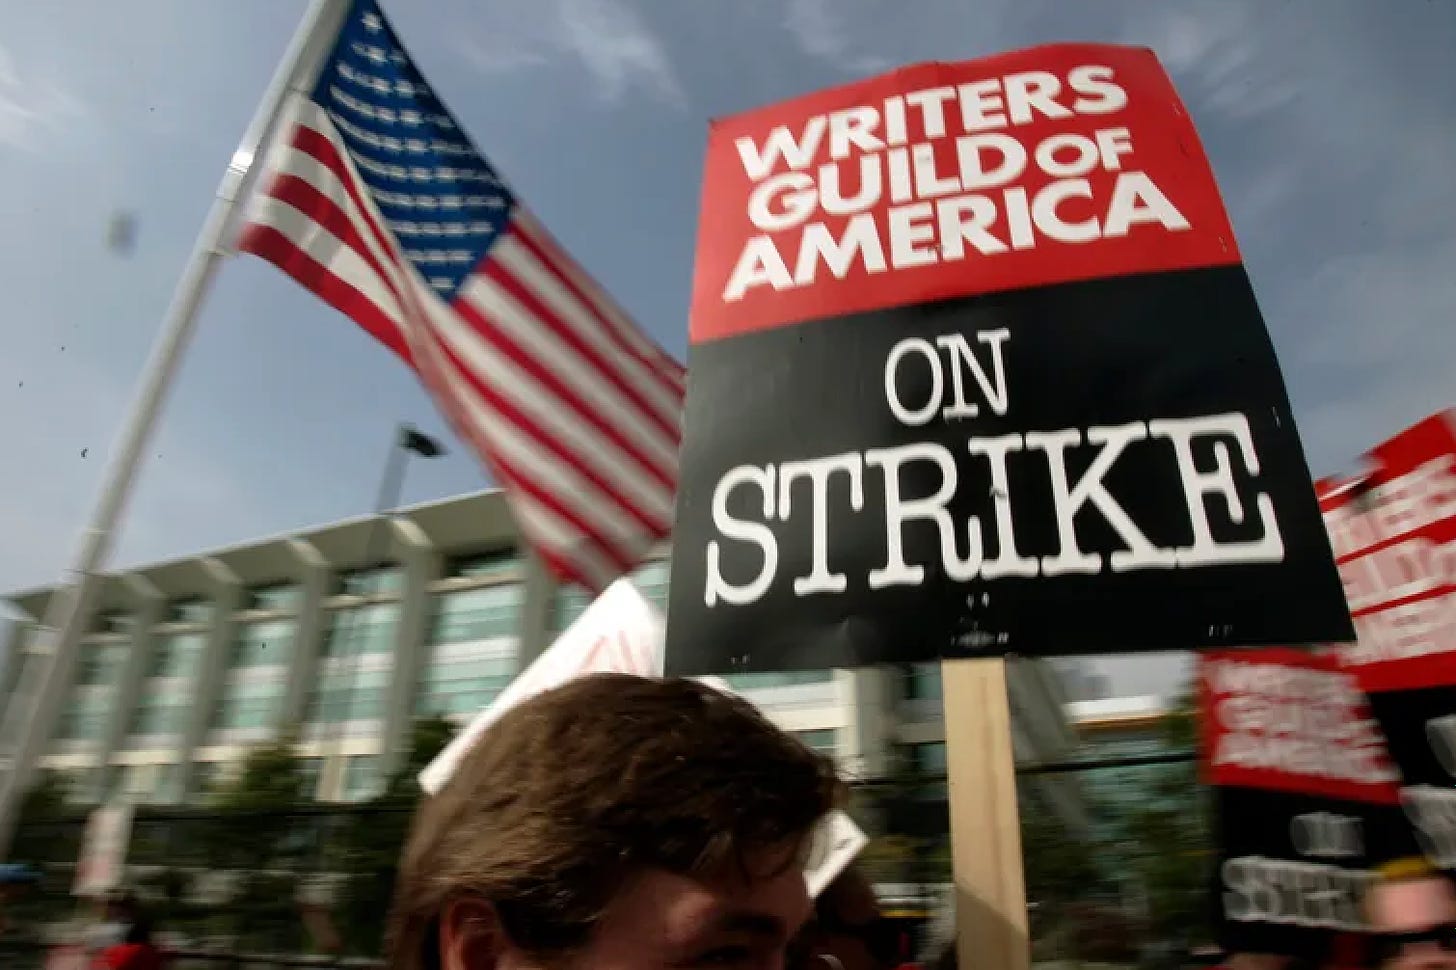 An image taken from a low angle of the WGA picket line. An American flag is waving in the background. The focal point is a sign being held in the air that reads "Writers Guild of America ON STRIKE." 